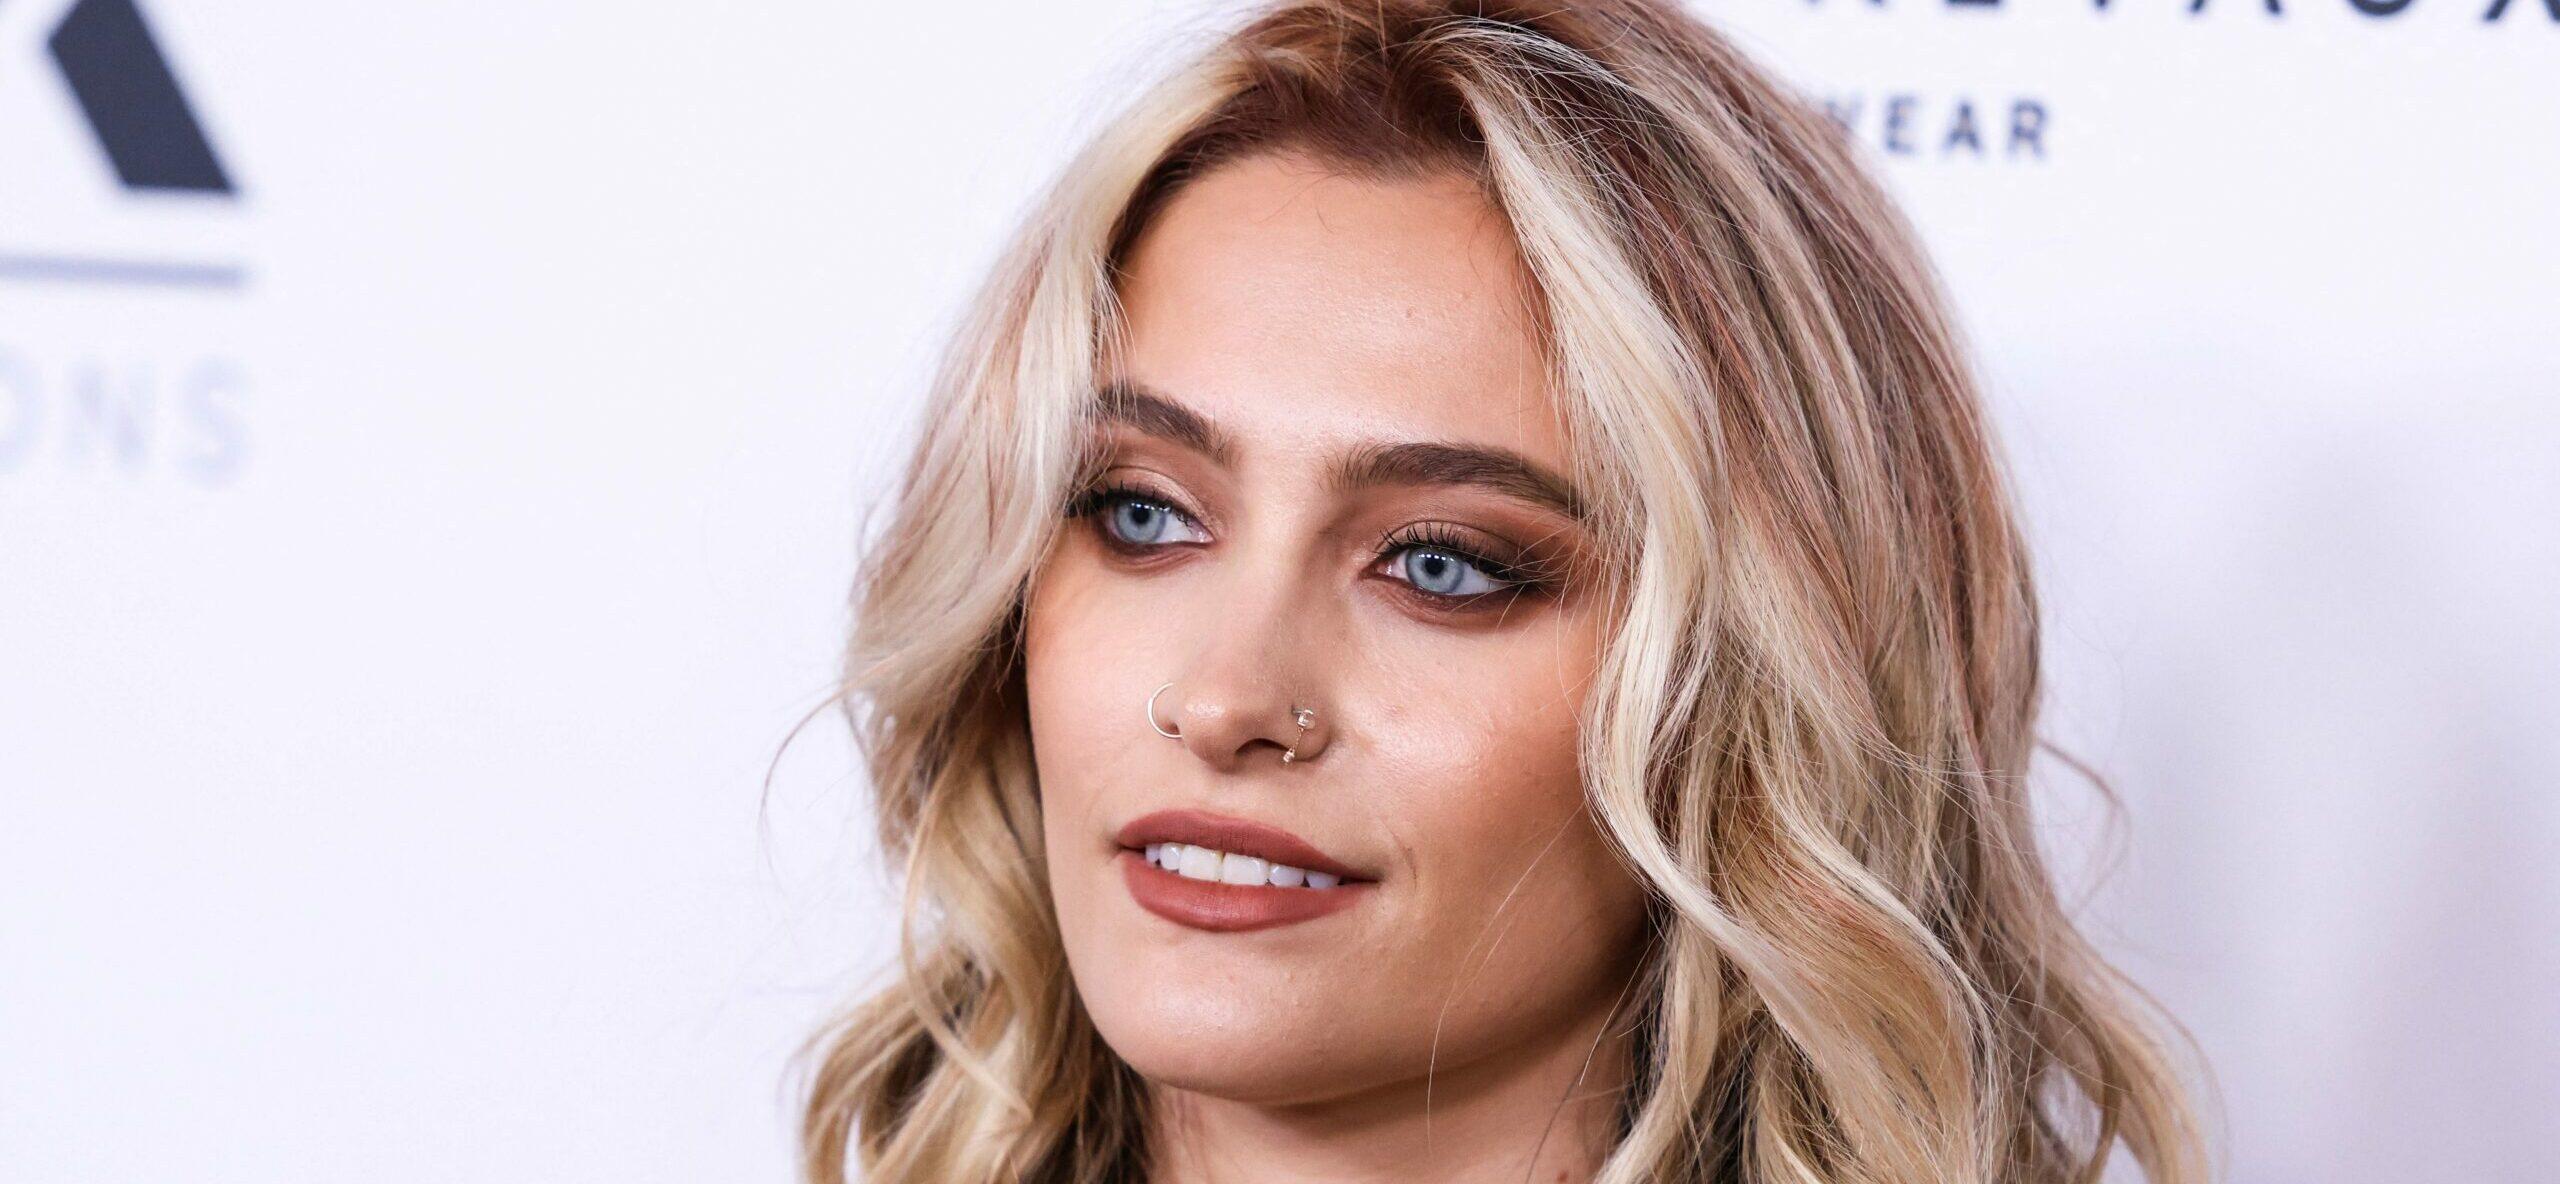 Paris Jackson Gets Real About Mental Health Journey: ‘Try To Treat Myself Kindly’